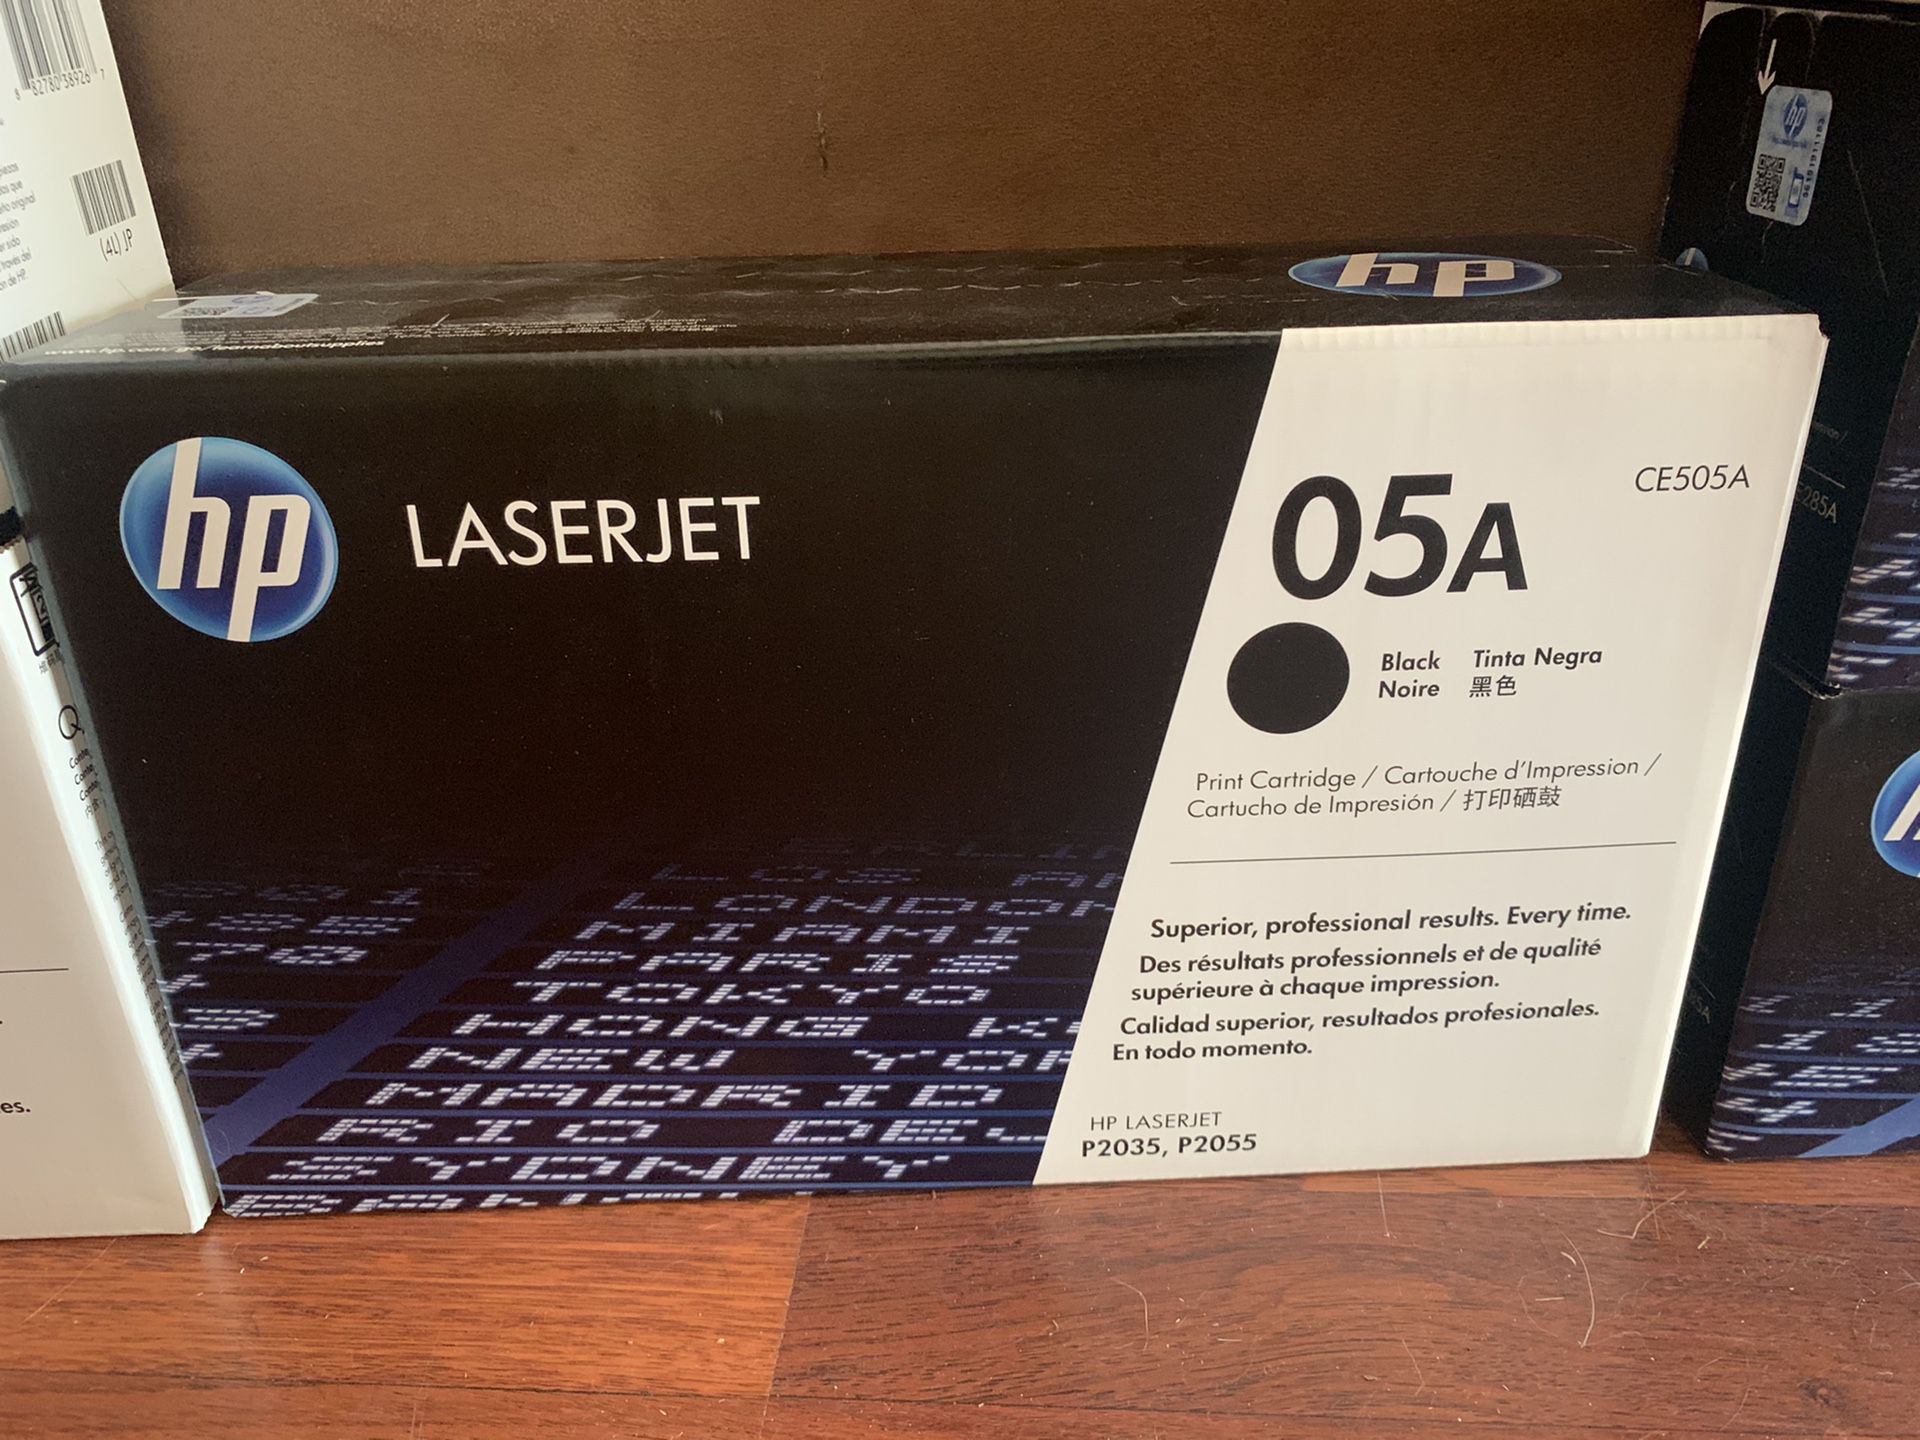 New HP laser jet printer cartridge for CE505a